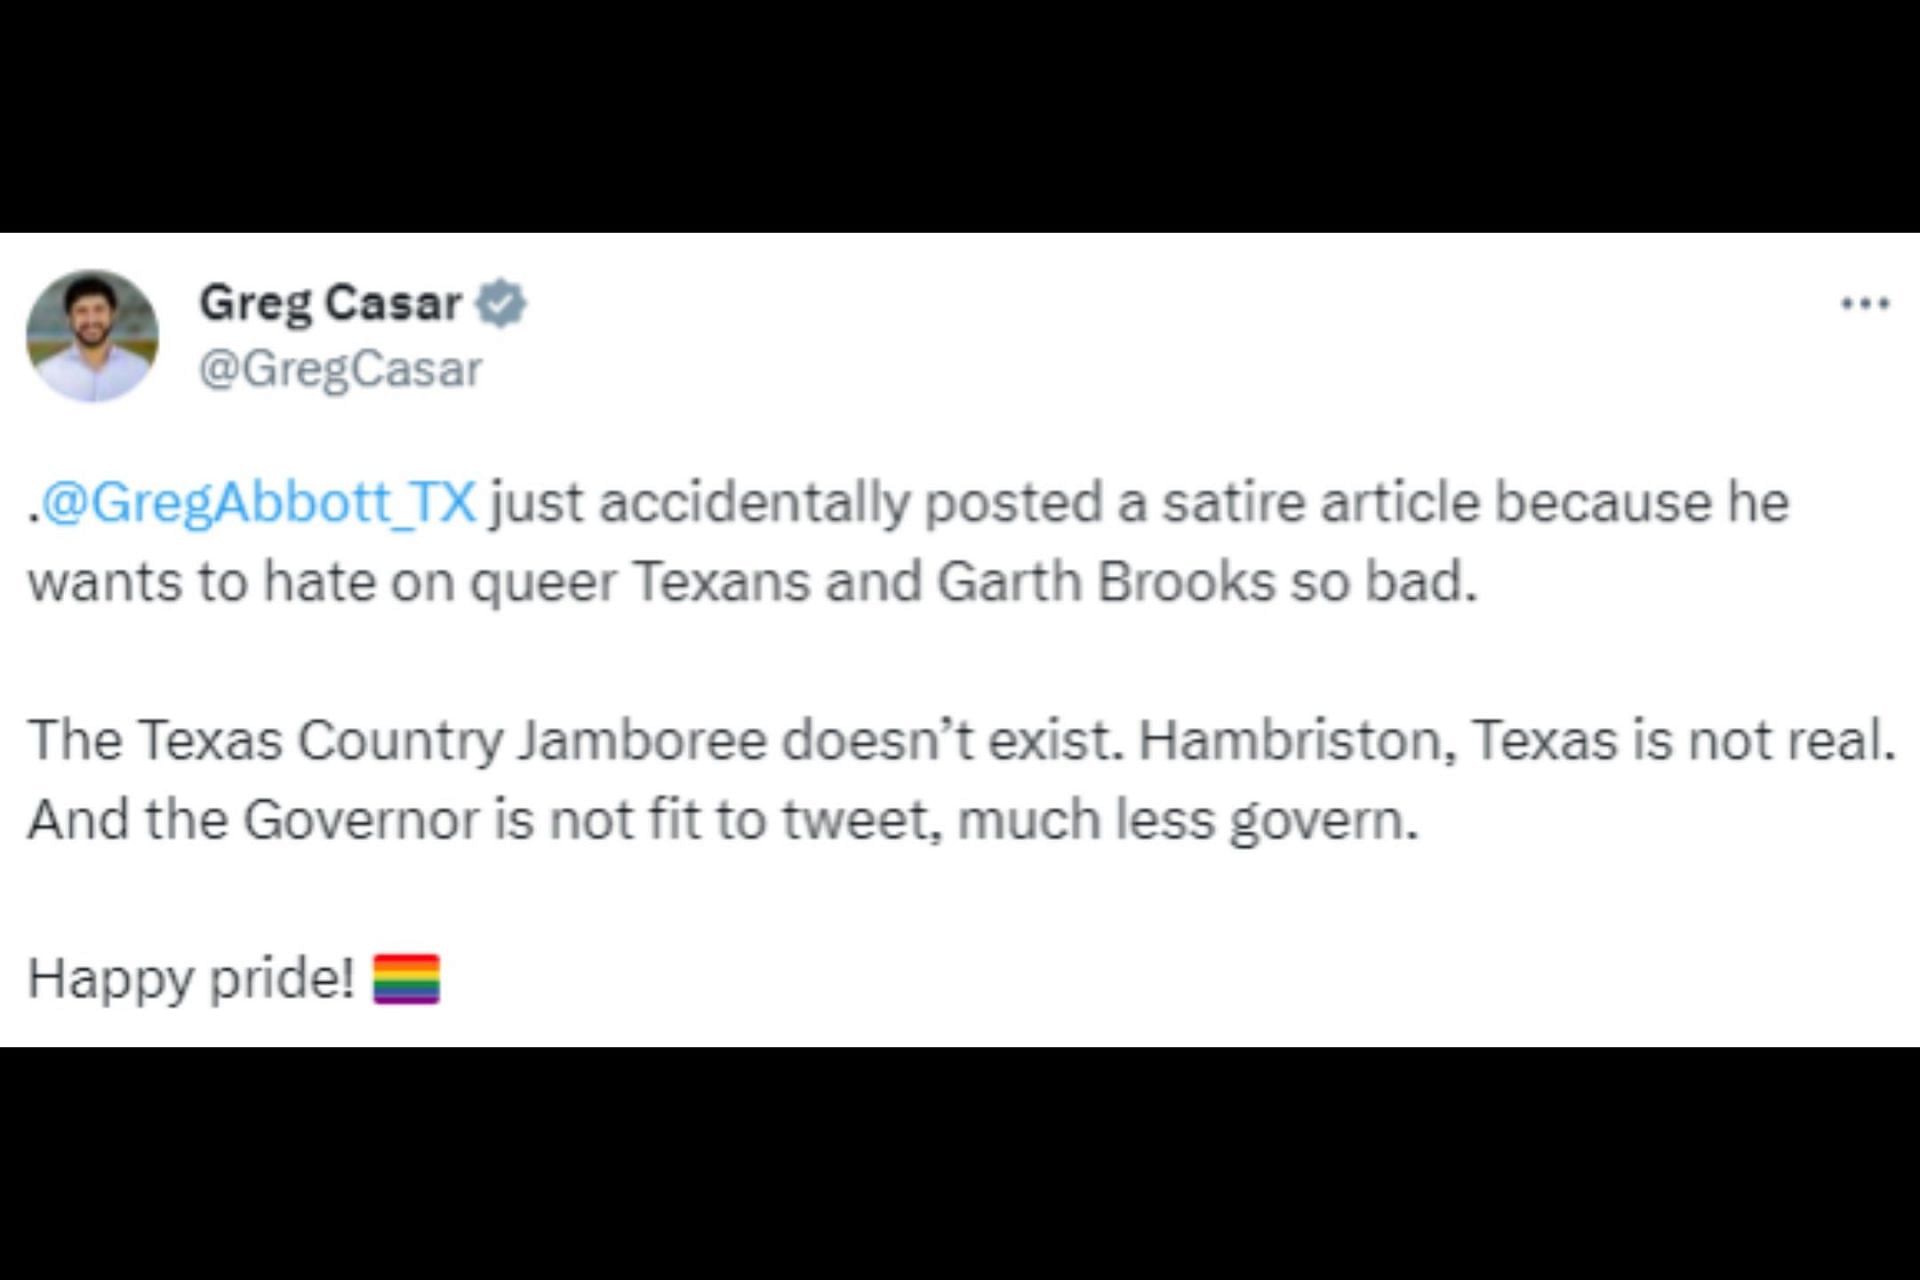 Netizens clarify that the article about Garth Brooks is a satire and not real. (Image via Twitter/@GregCasar)